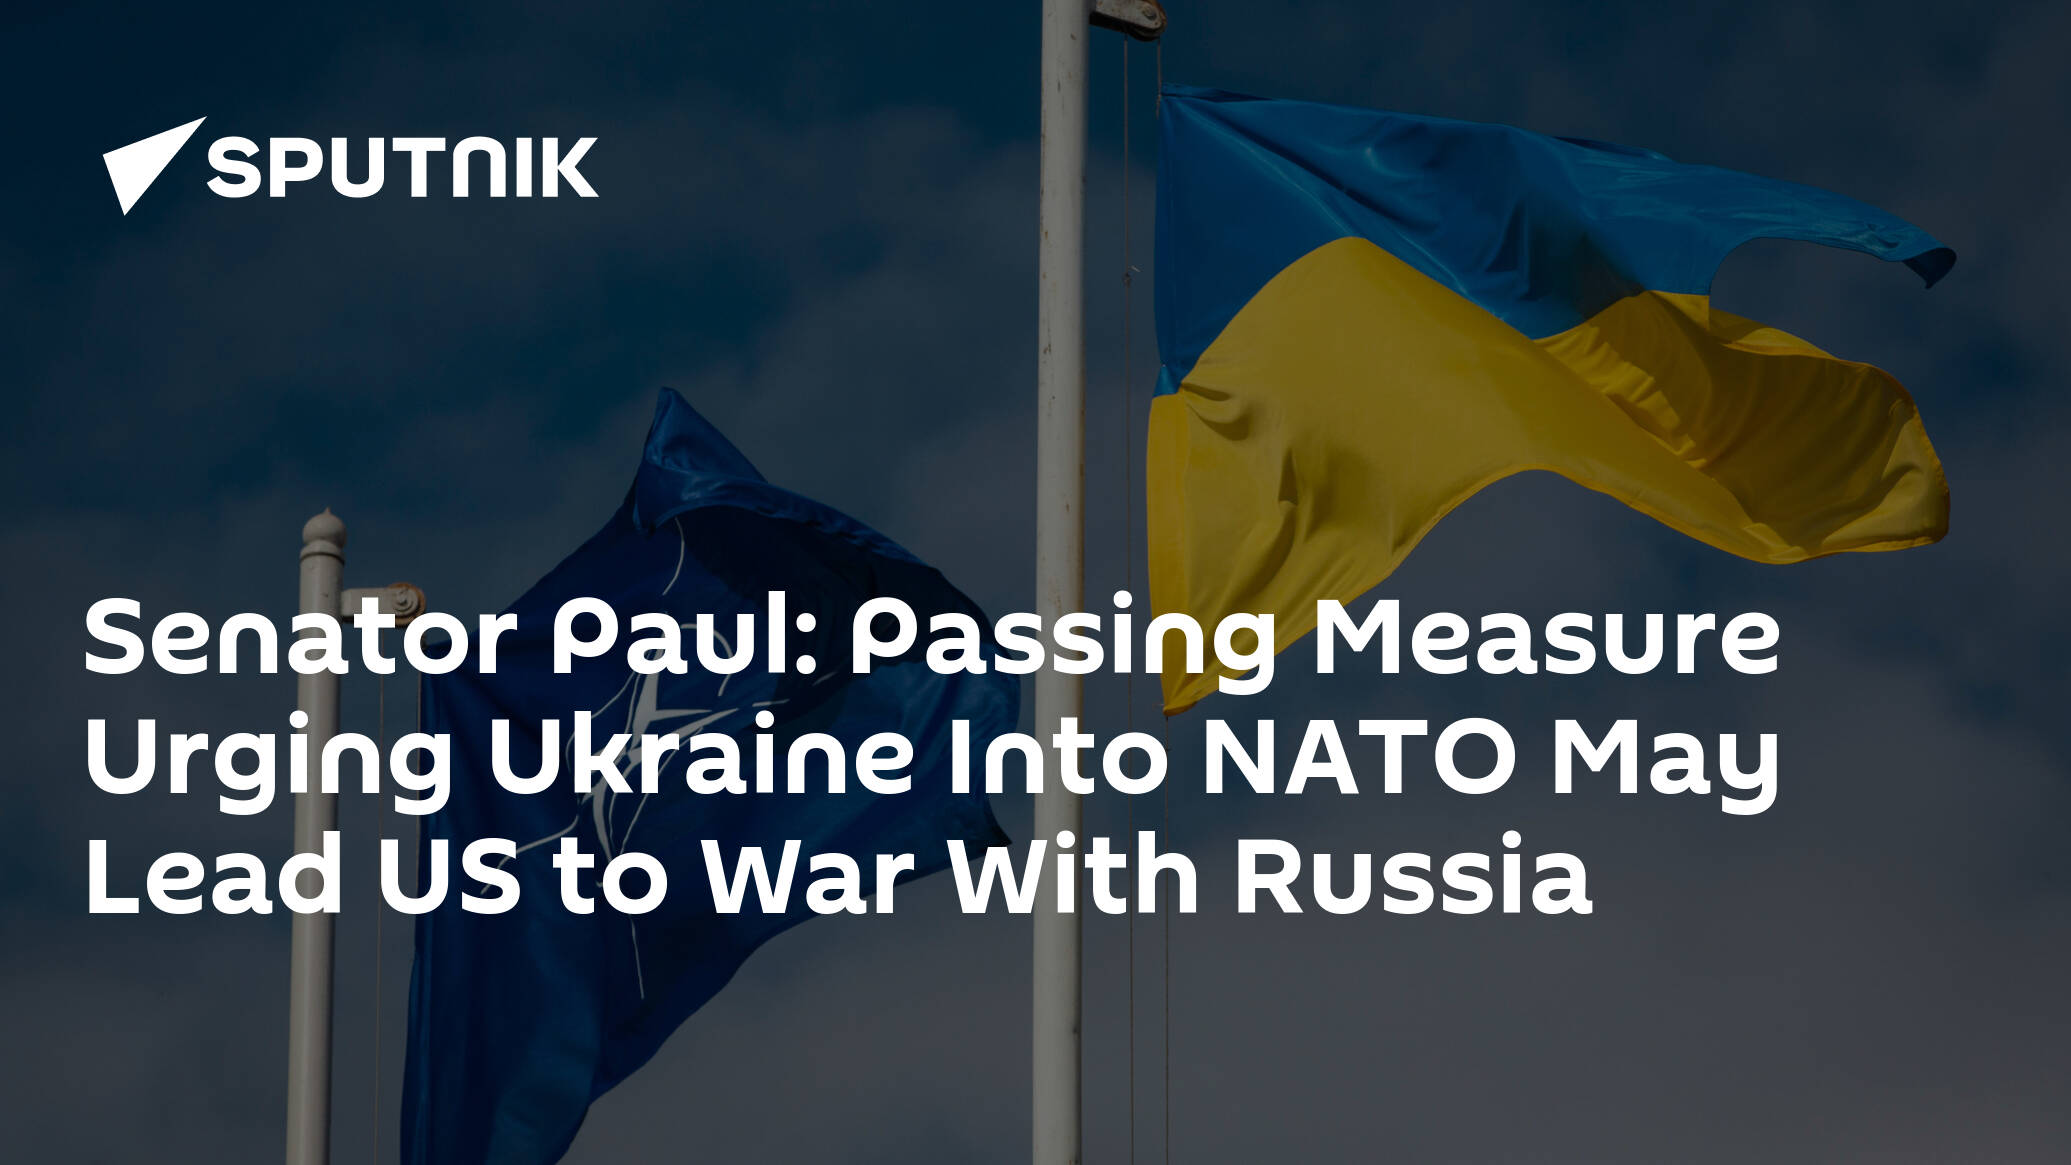 Senator Paul: Passing Measure Urging Ukraine Into NATO May Lead US to War With Russia